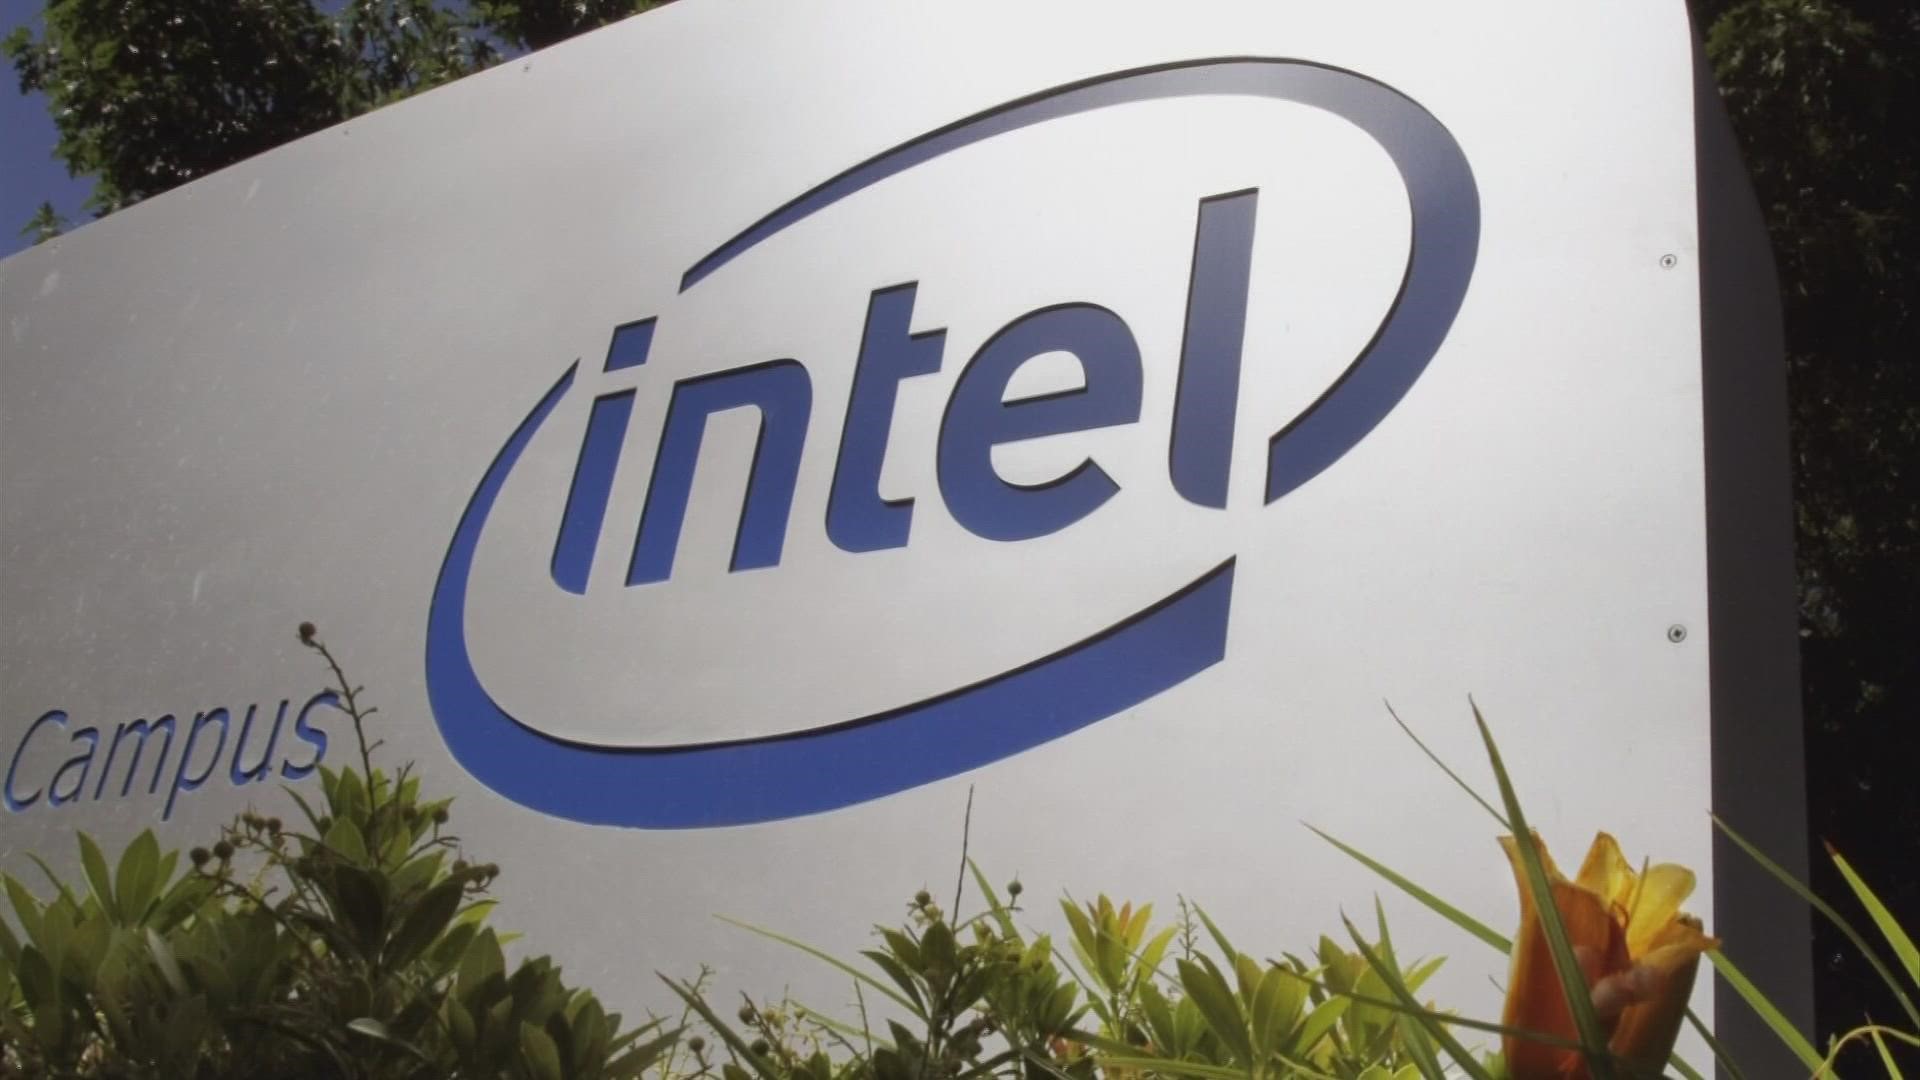 Intel's investment is the largest in state history and will employ 3,000 workers and potentially more in the future.